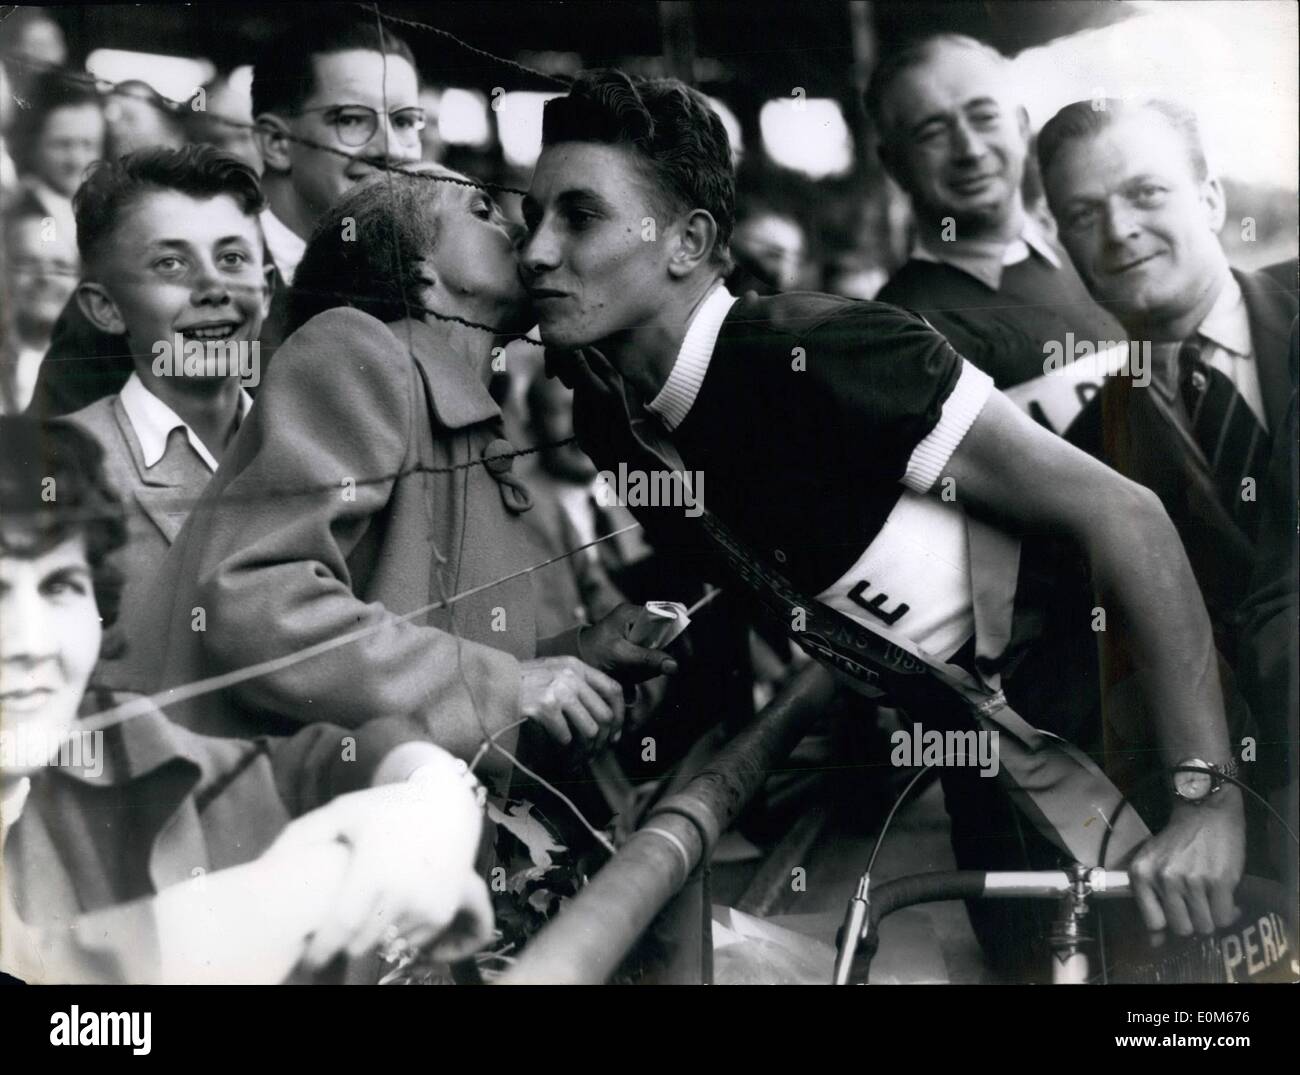 Sep. 09, 1953 - 19 Year Old Cyclist Wins The ''Prix Des Nations'': 19 year old Jacques Anquetil (of Normandy) being kissed by his mother after his victory in the Grand Prix Des Nations (Cycle Race over a distance of 140 kms) in Stock Photo